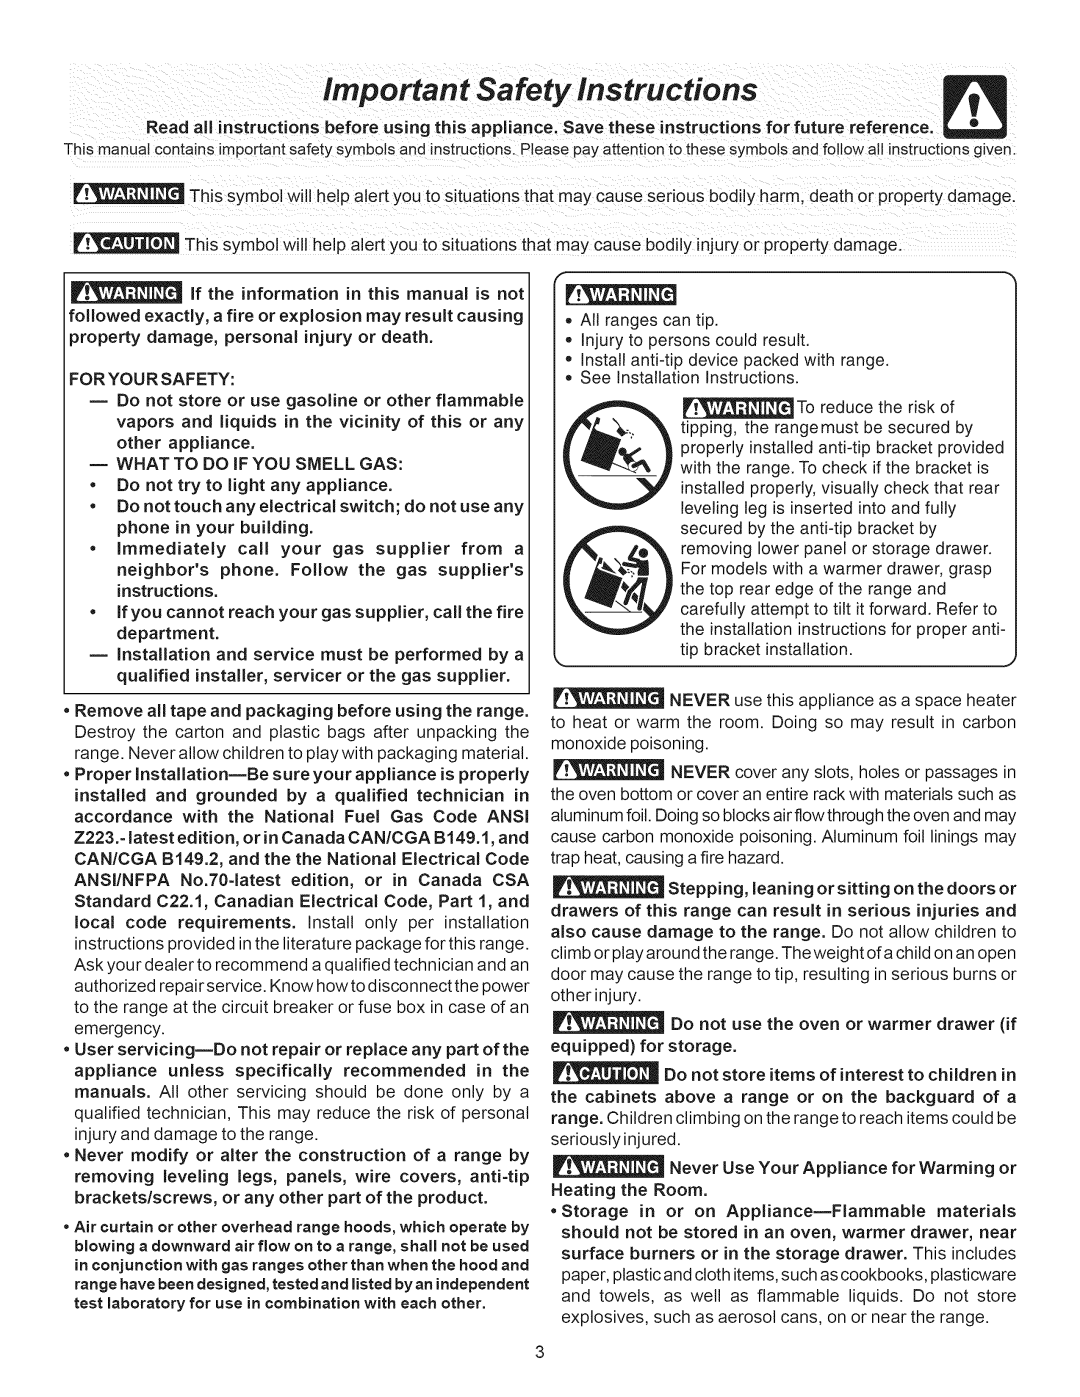 Crosley ES300 manual Important Safety Instructions, installation 